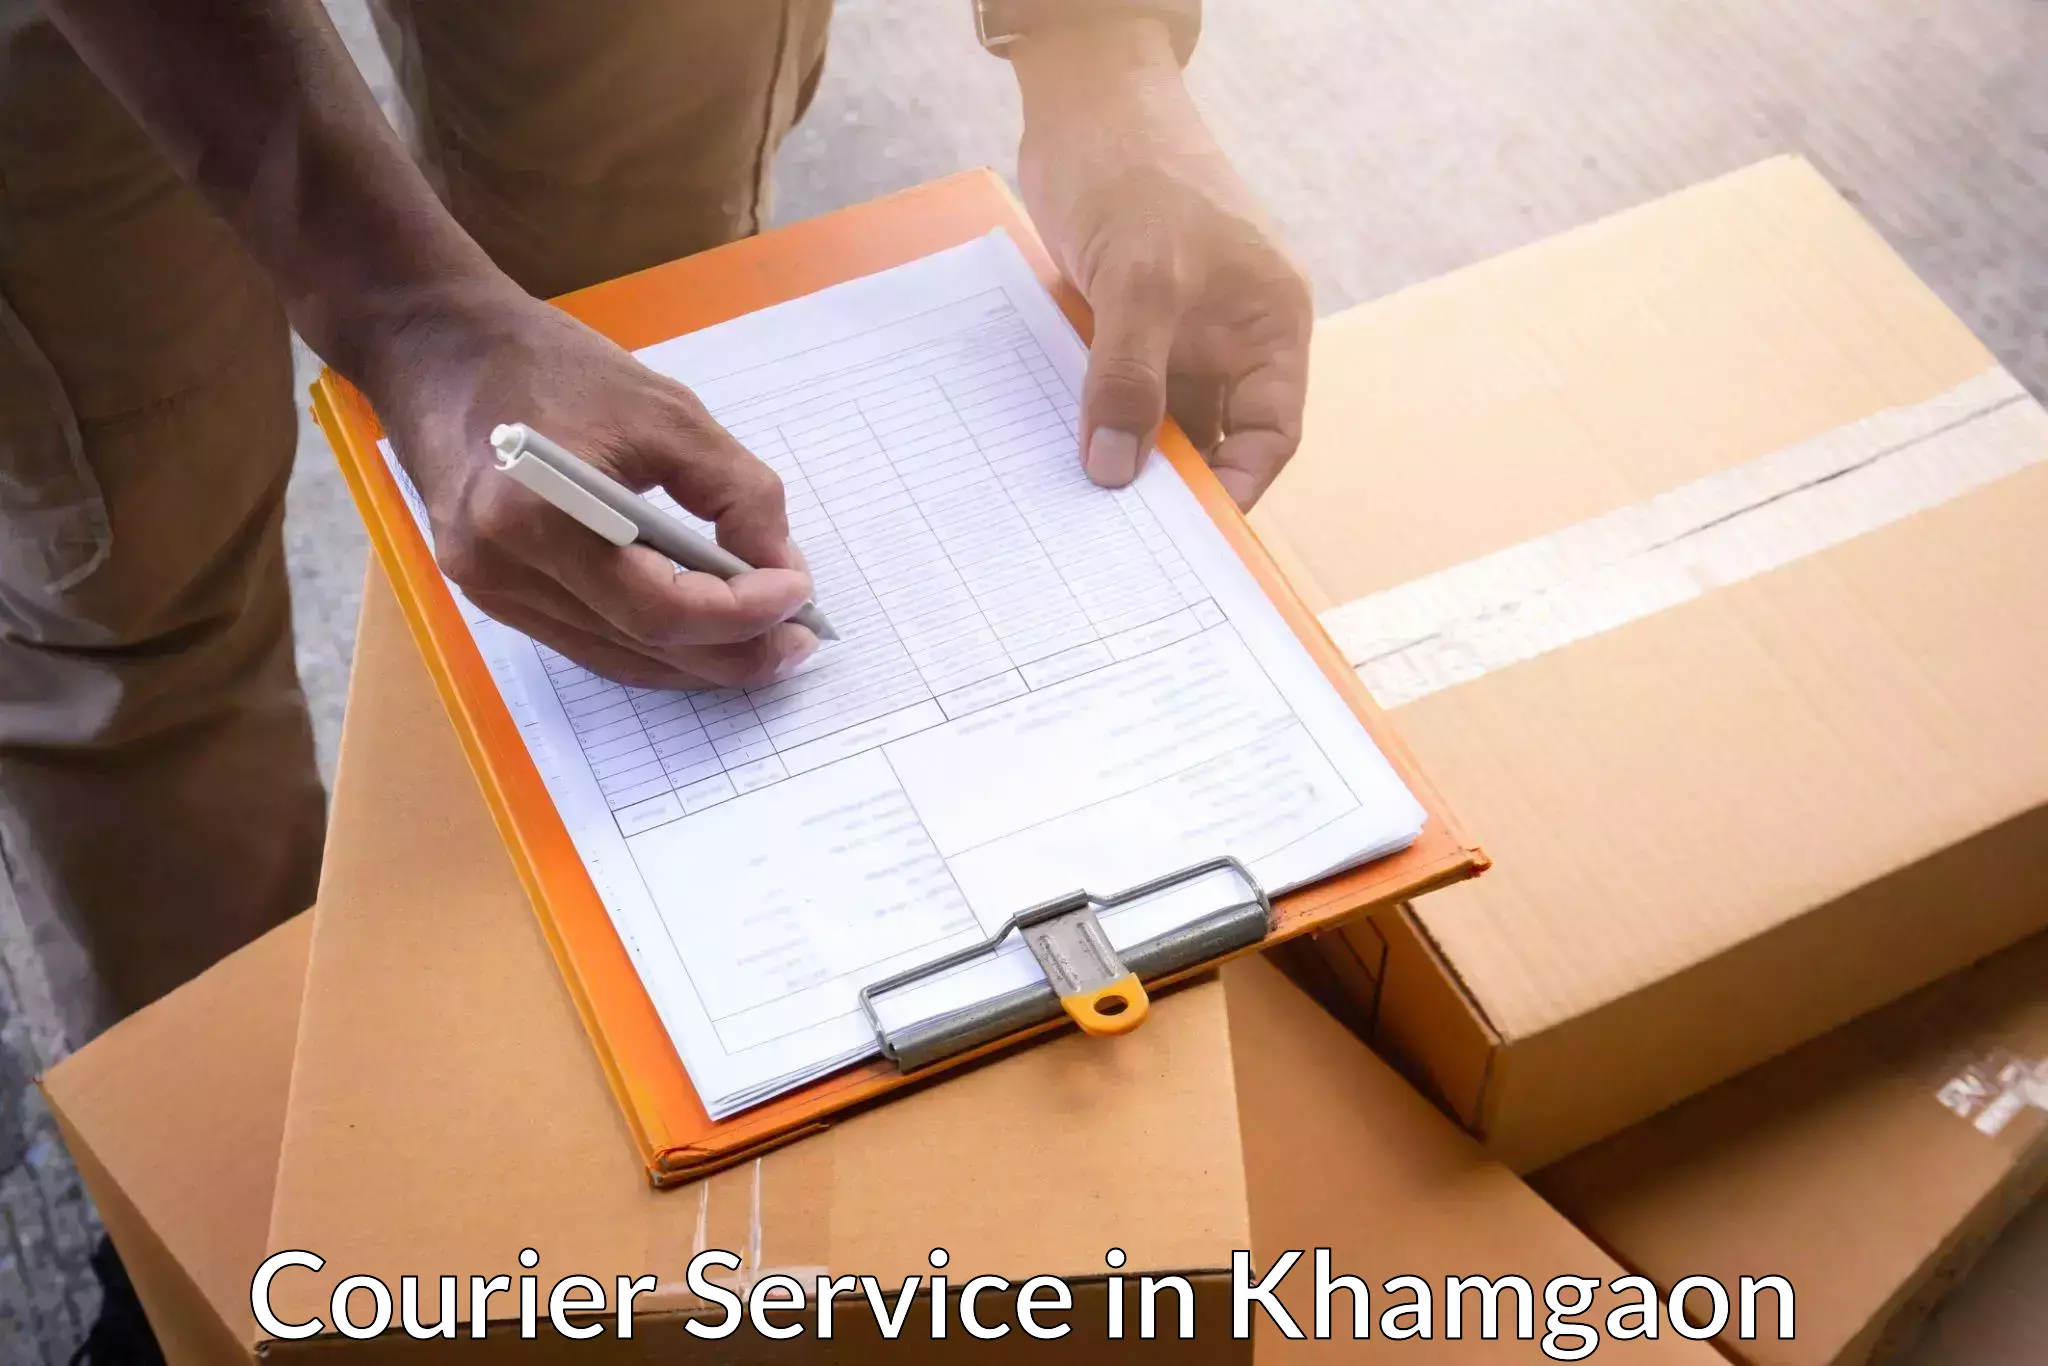 Overnight delivery in Khamgaon